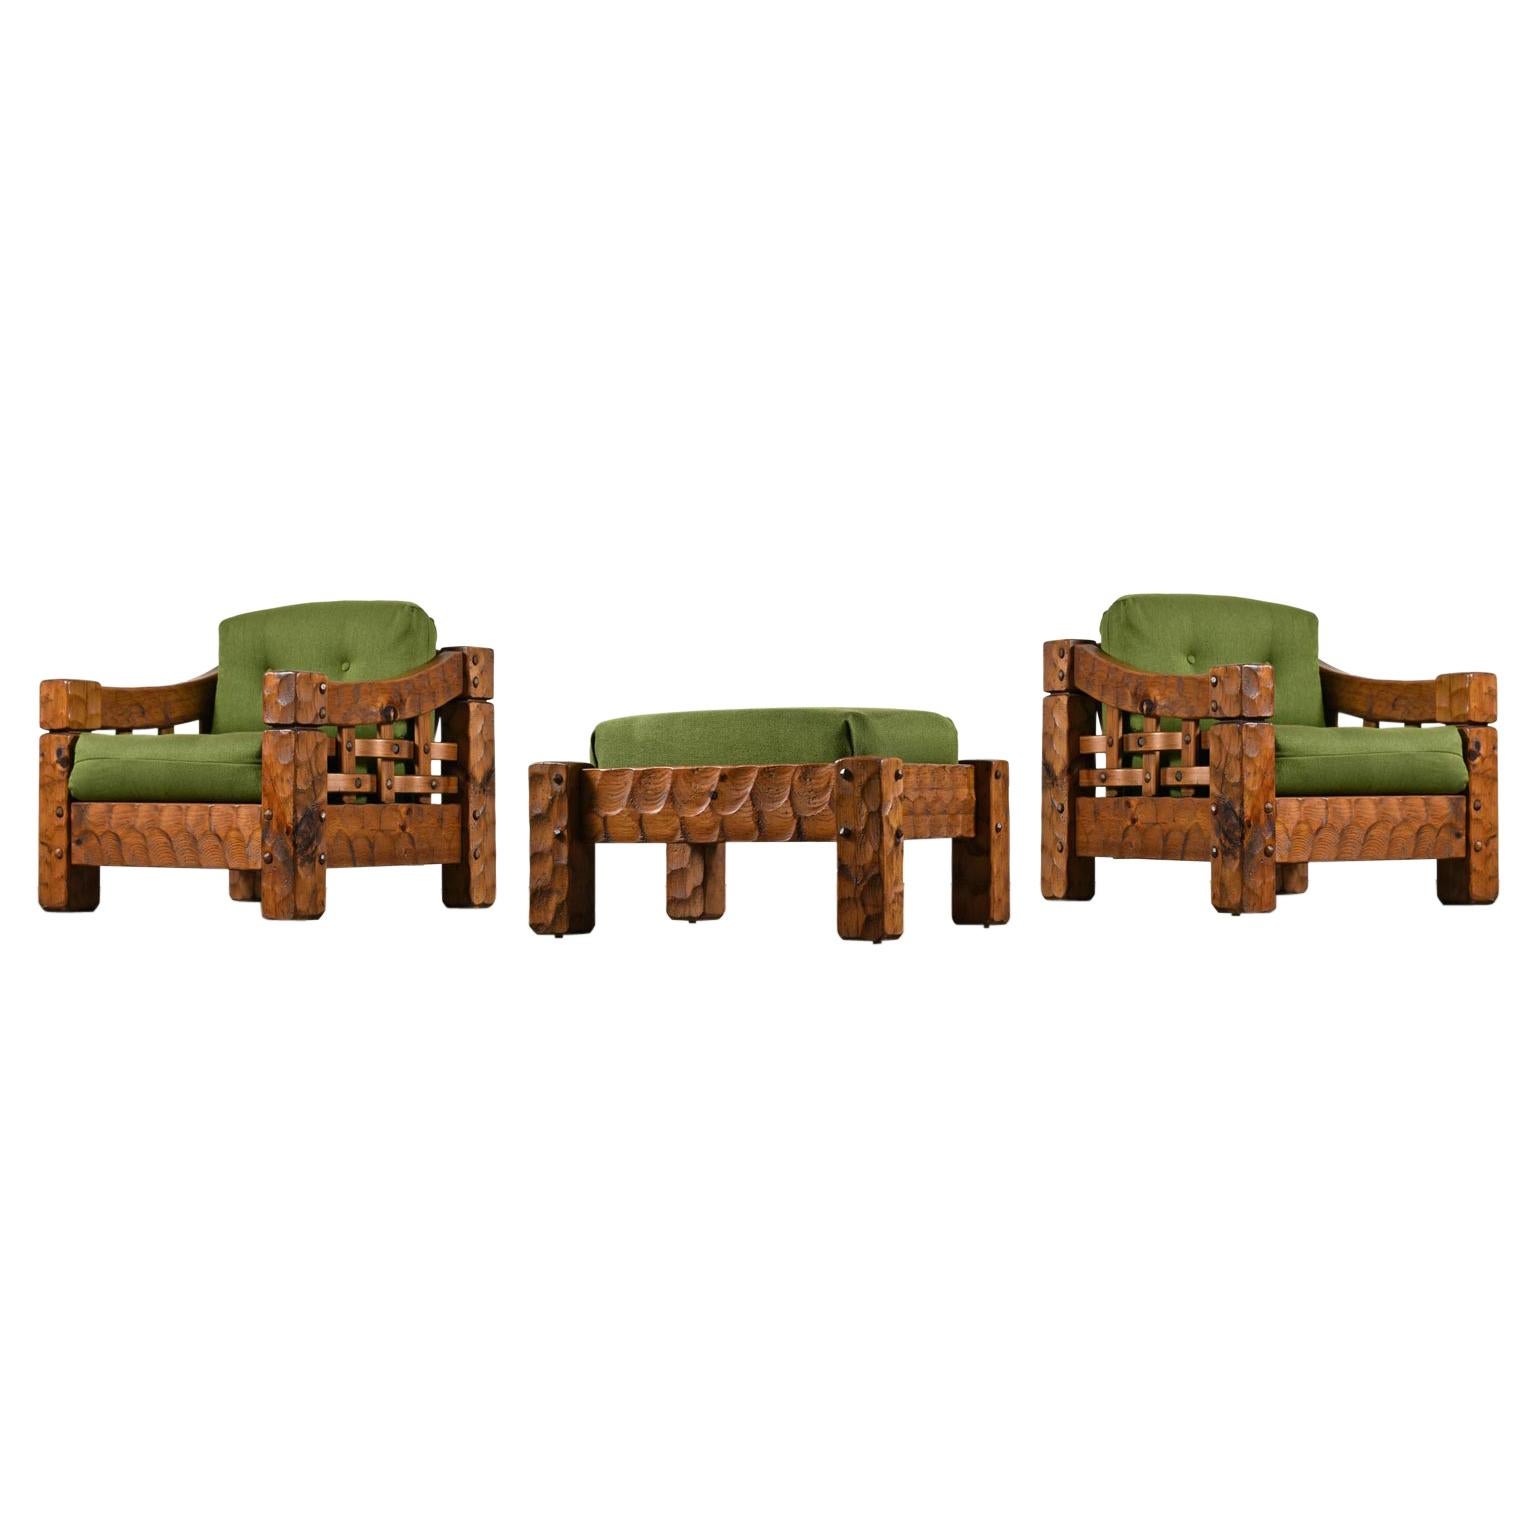 Rustic Modern Solid Knotty Pine Lounge Chairs & Ottoman Set by Null